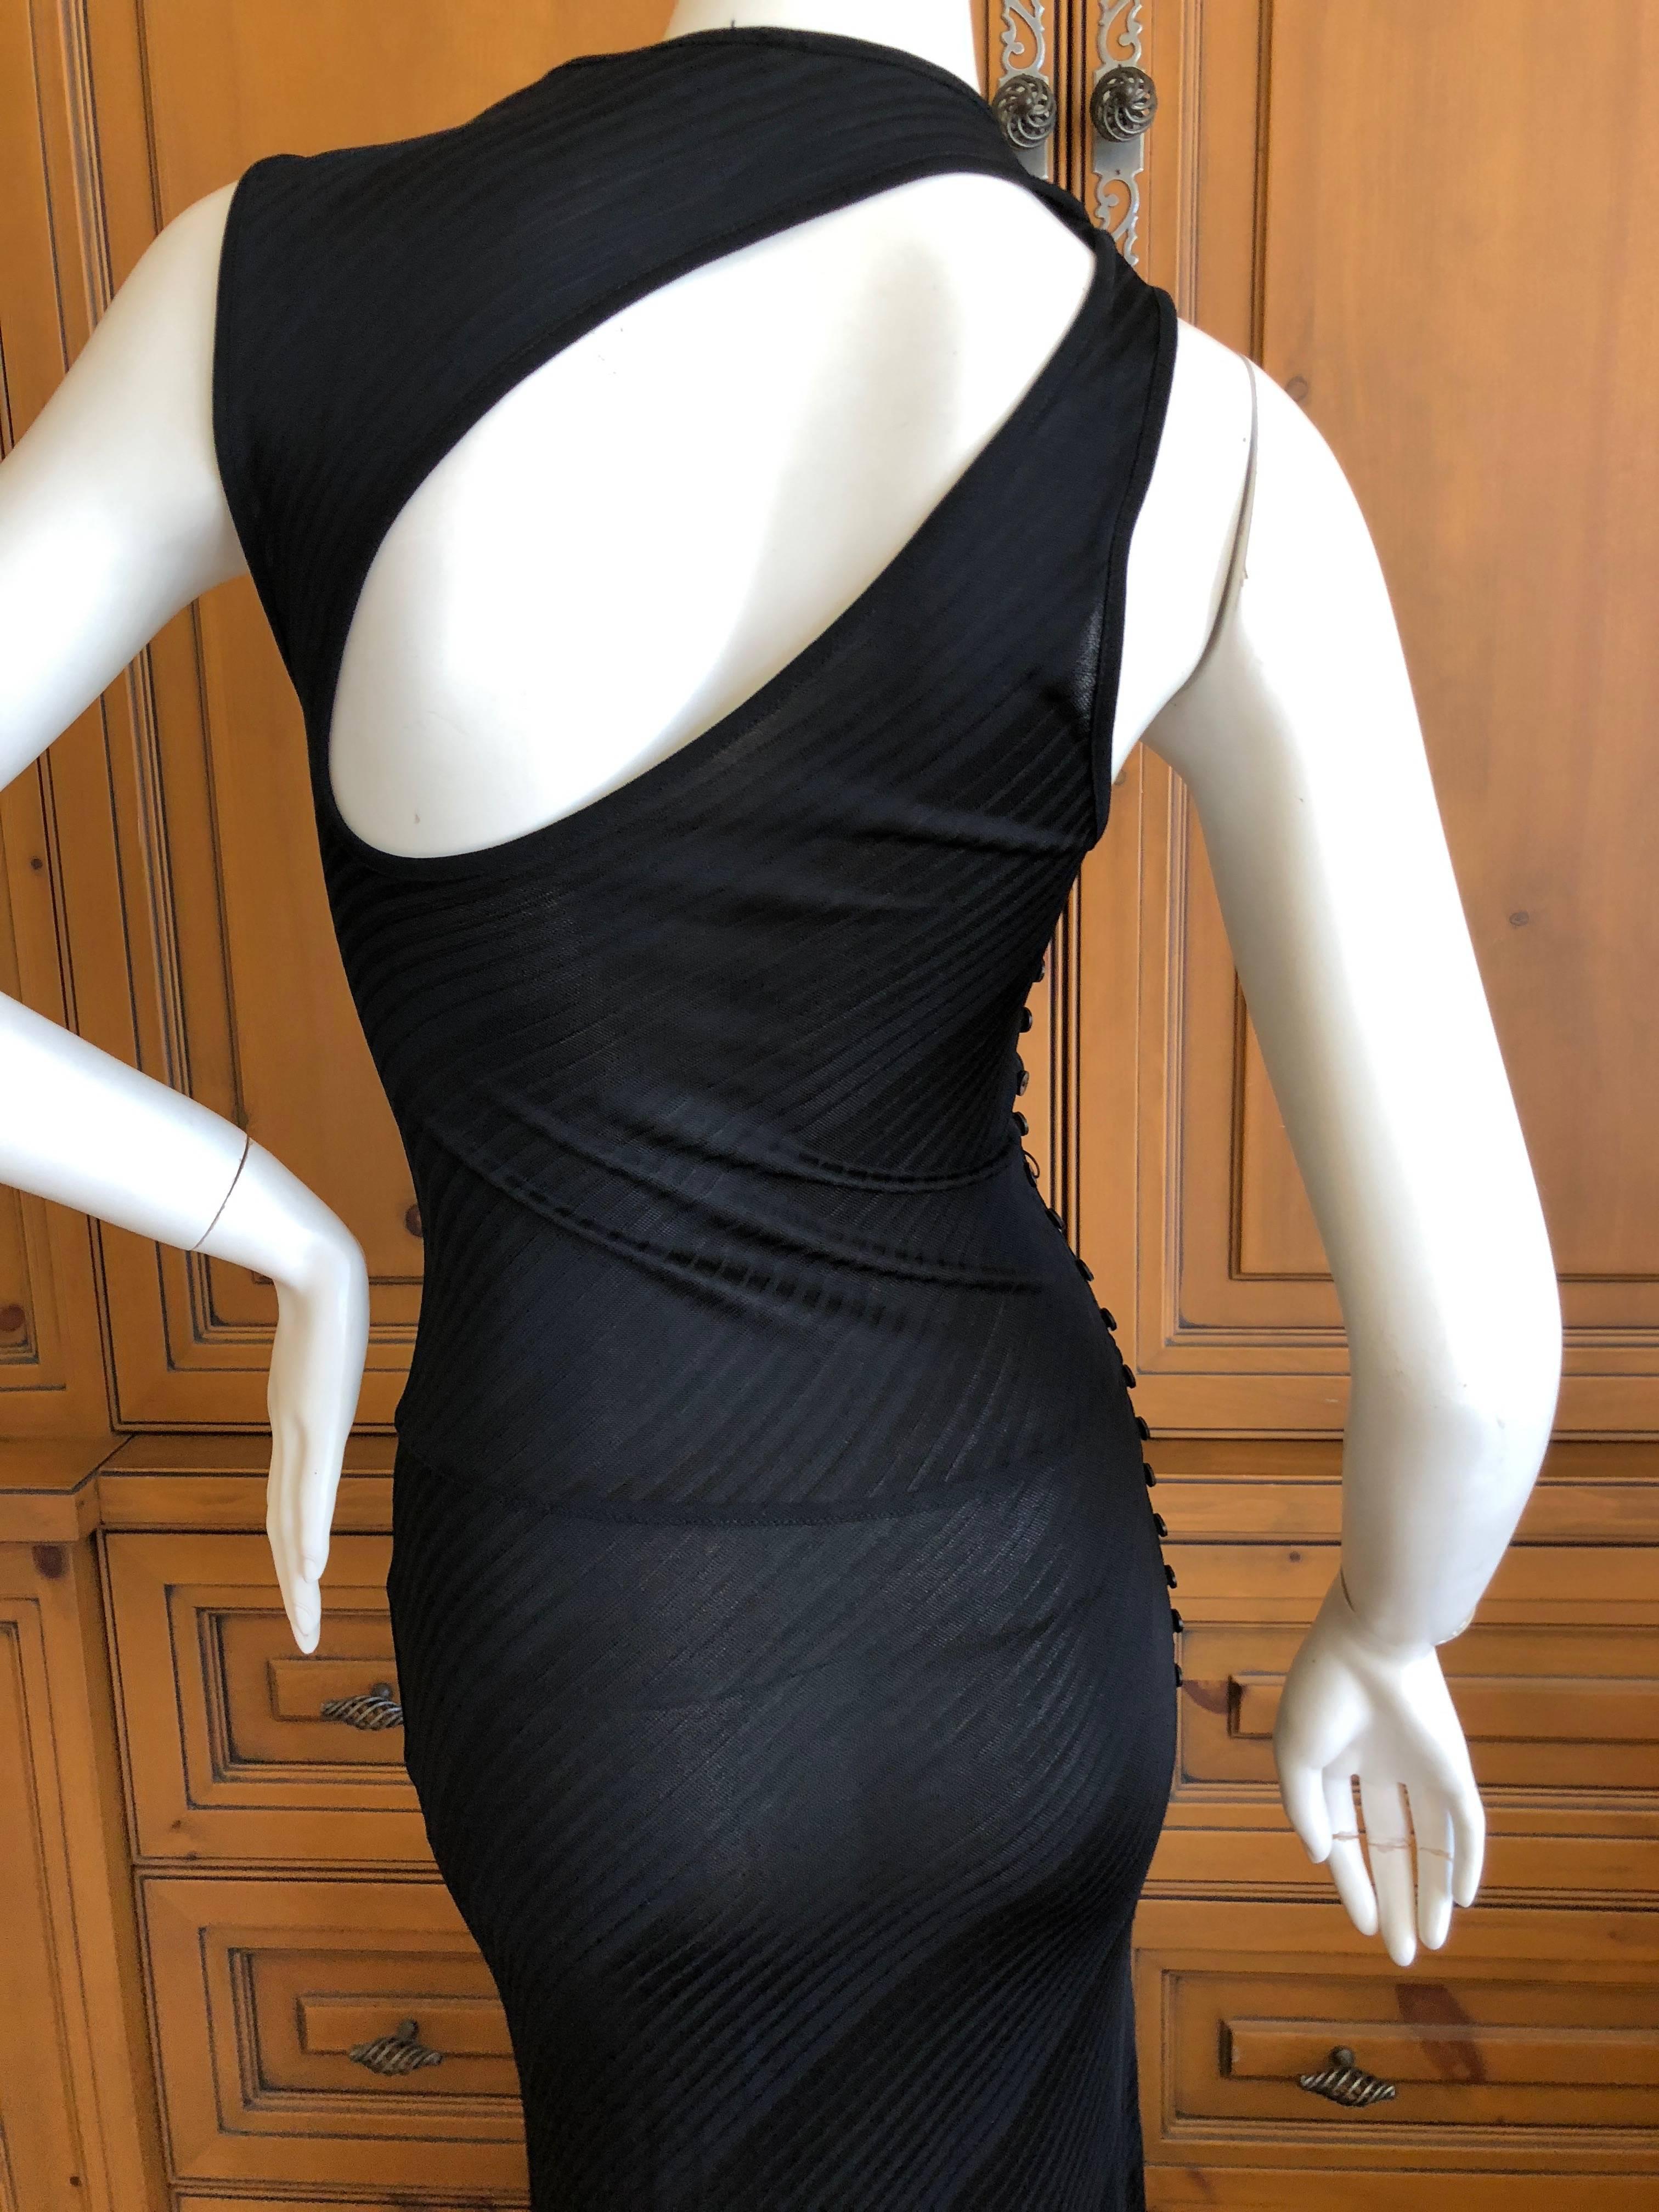  Vintage Versus, Gianni Versace Sexy Sheer Side Slit Evening Dress w Cut Outs 4